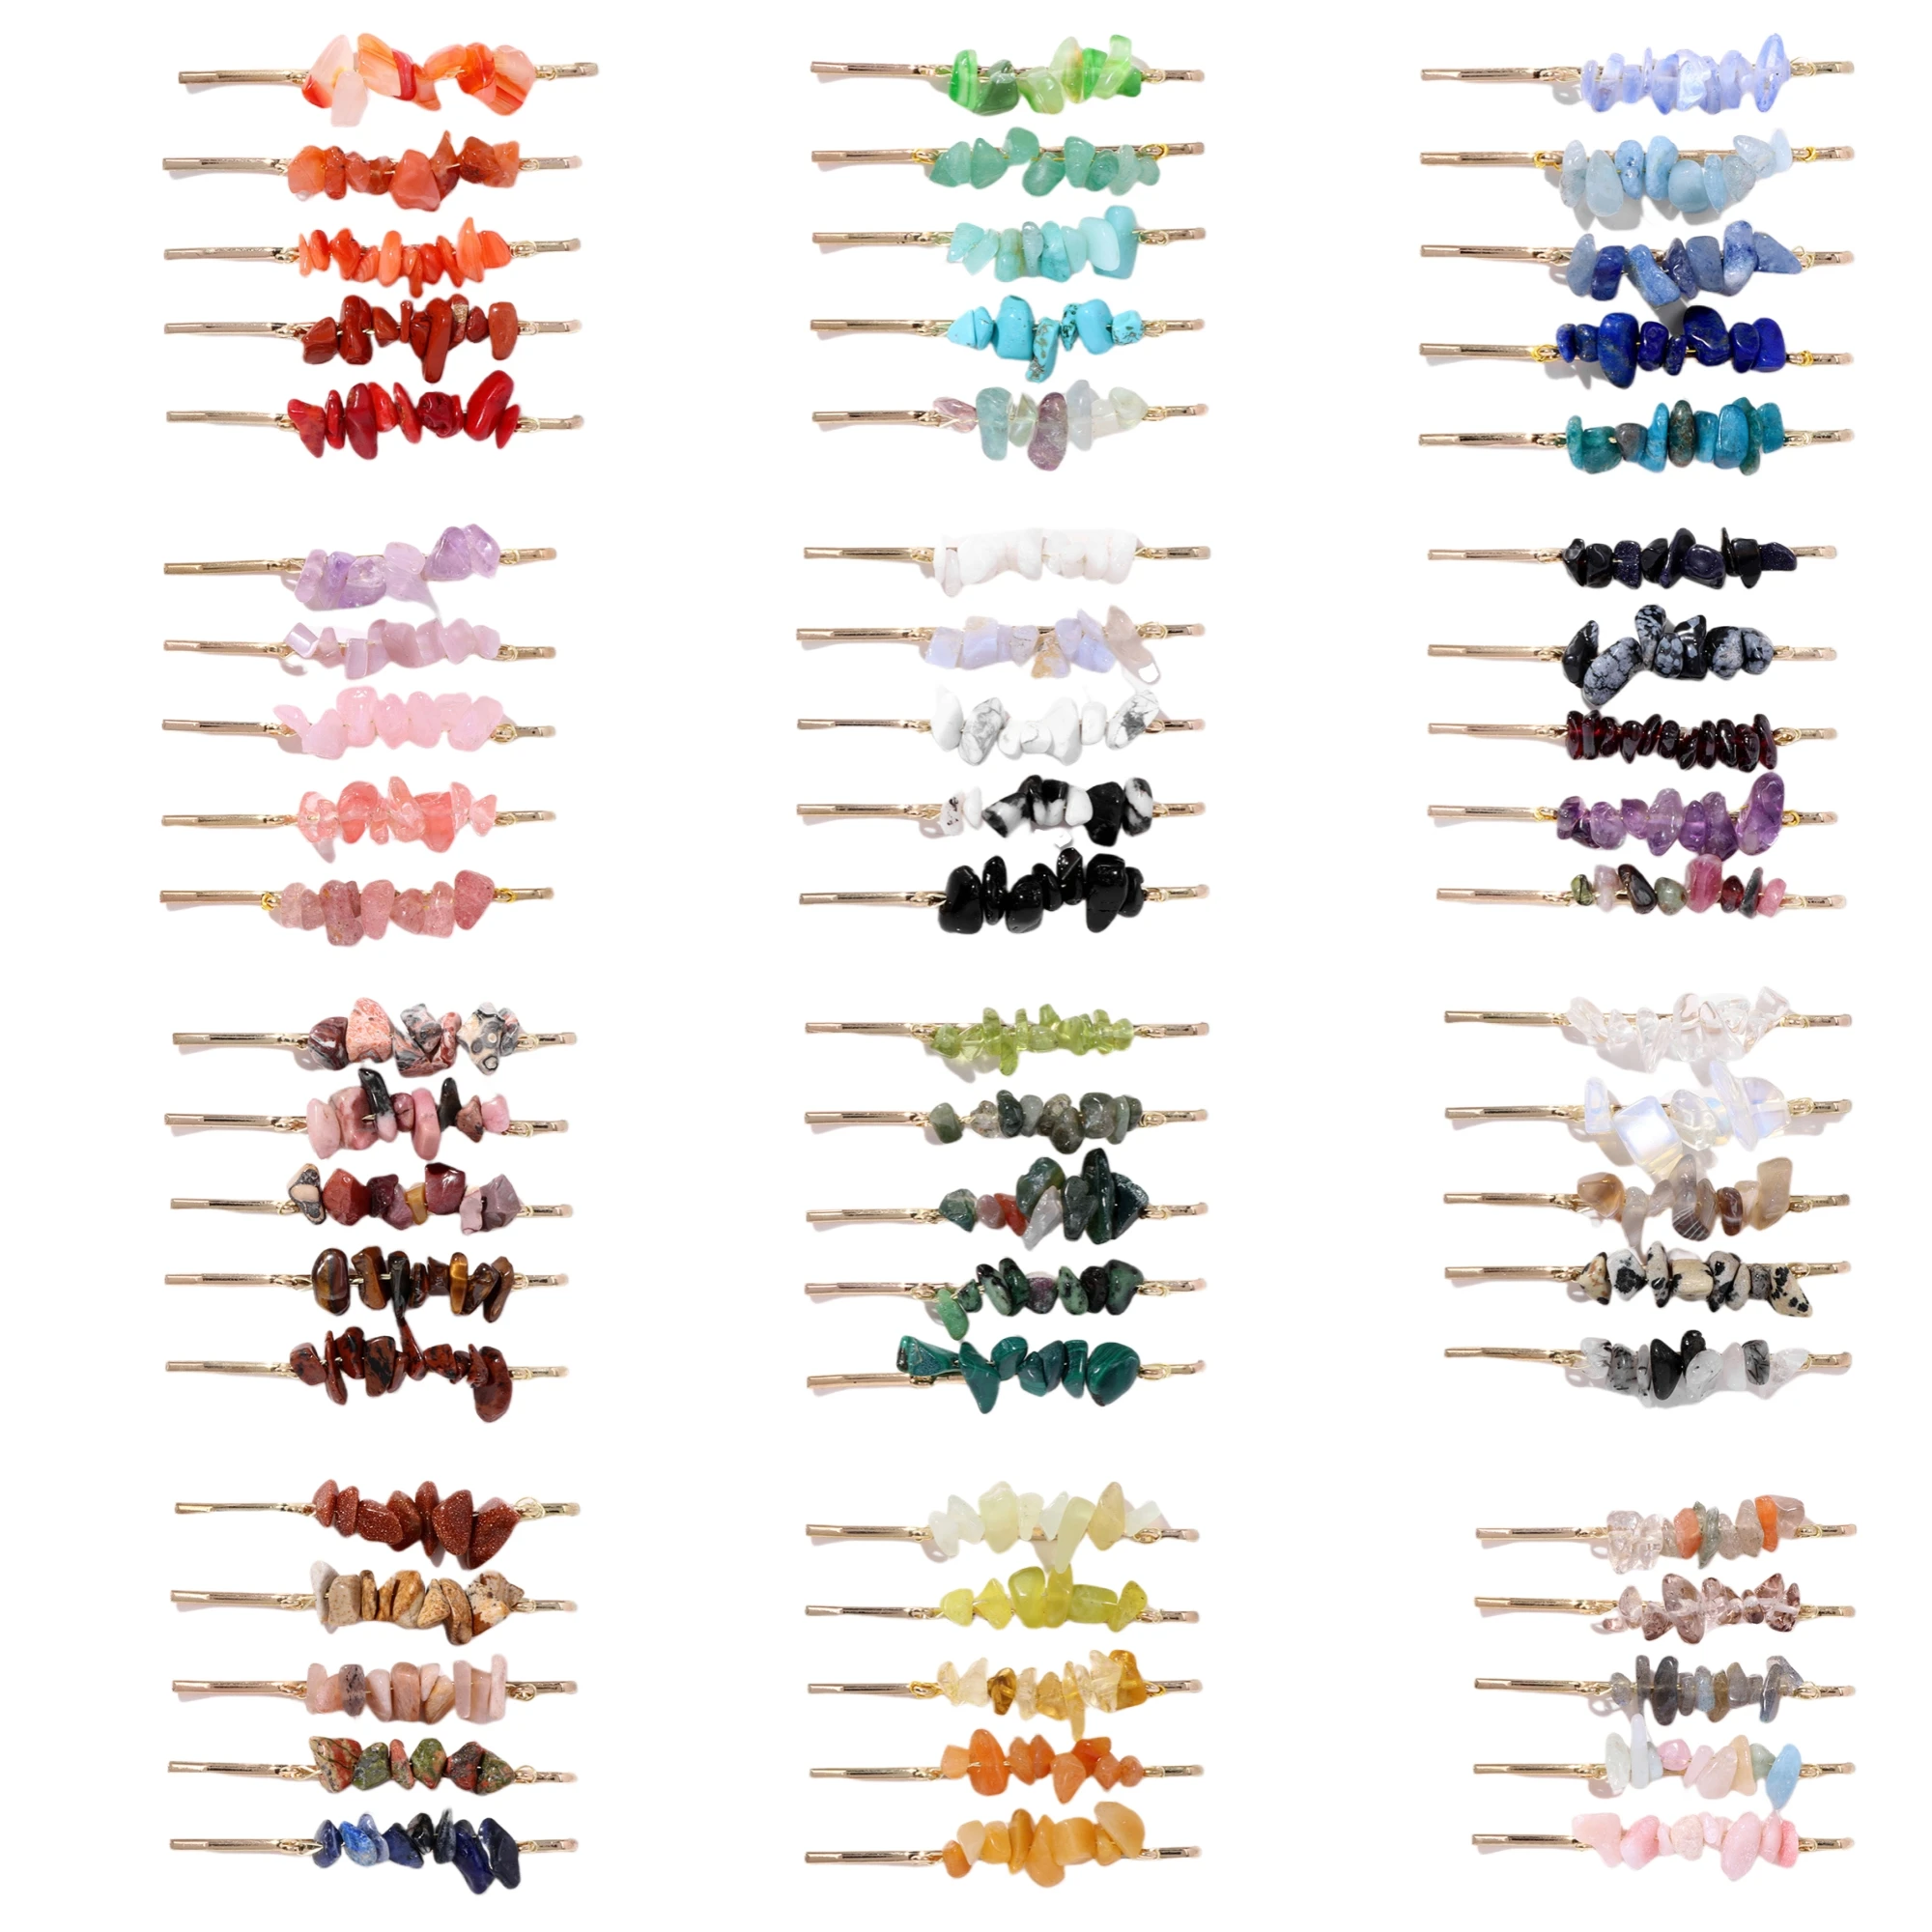 Women Gemstone Hair Clip 5PCS Natural Stone Crystal Irregular Chips Hairpins Gold Color Headwear Barrettes Girl friend Party crystal ball alloy holder irregular silver color tree branch shape display base for exotic stone balls tripod crafts ornaments